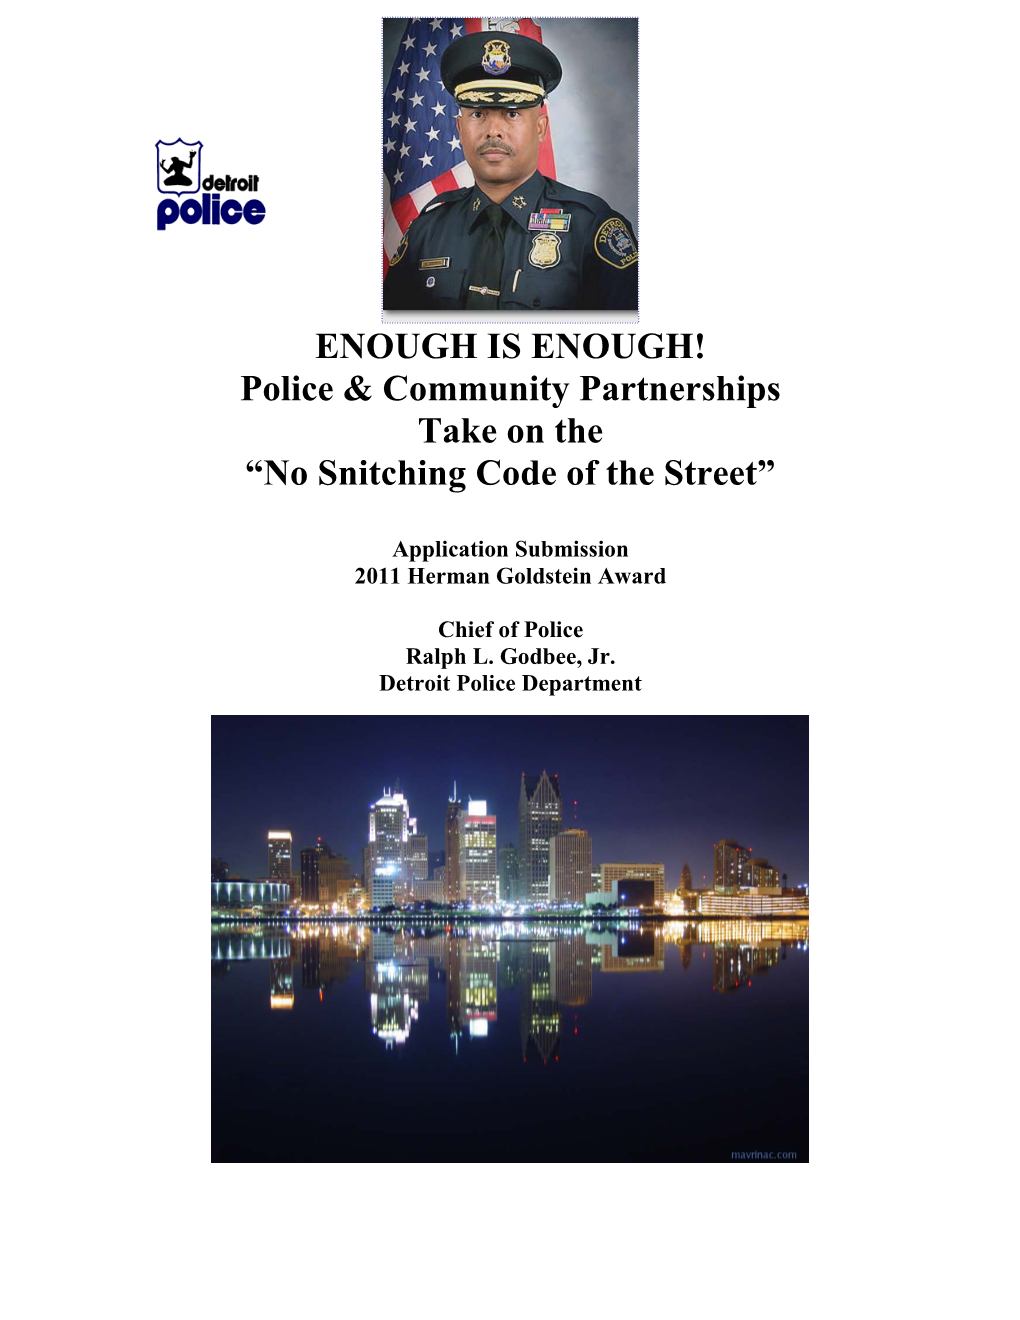 Police & Community Partnerships Take on the “No Snitching Code Of